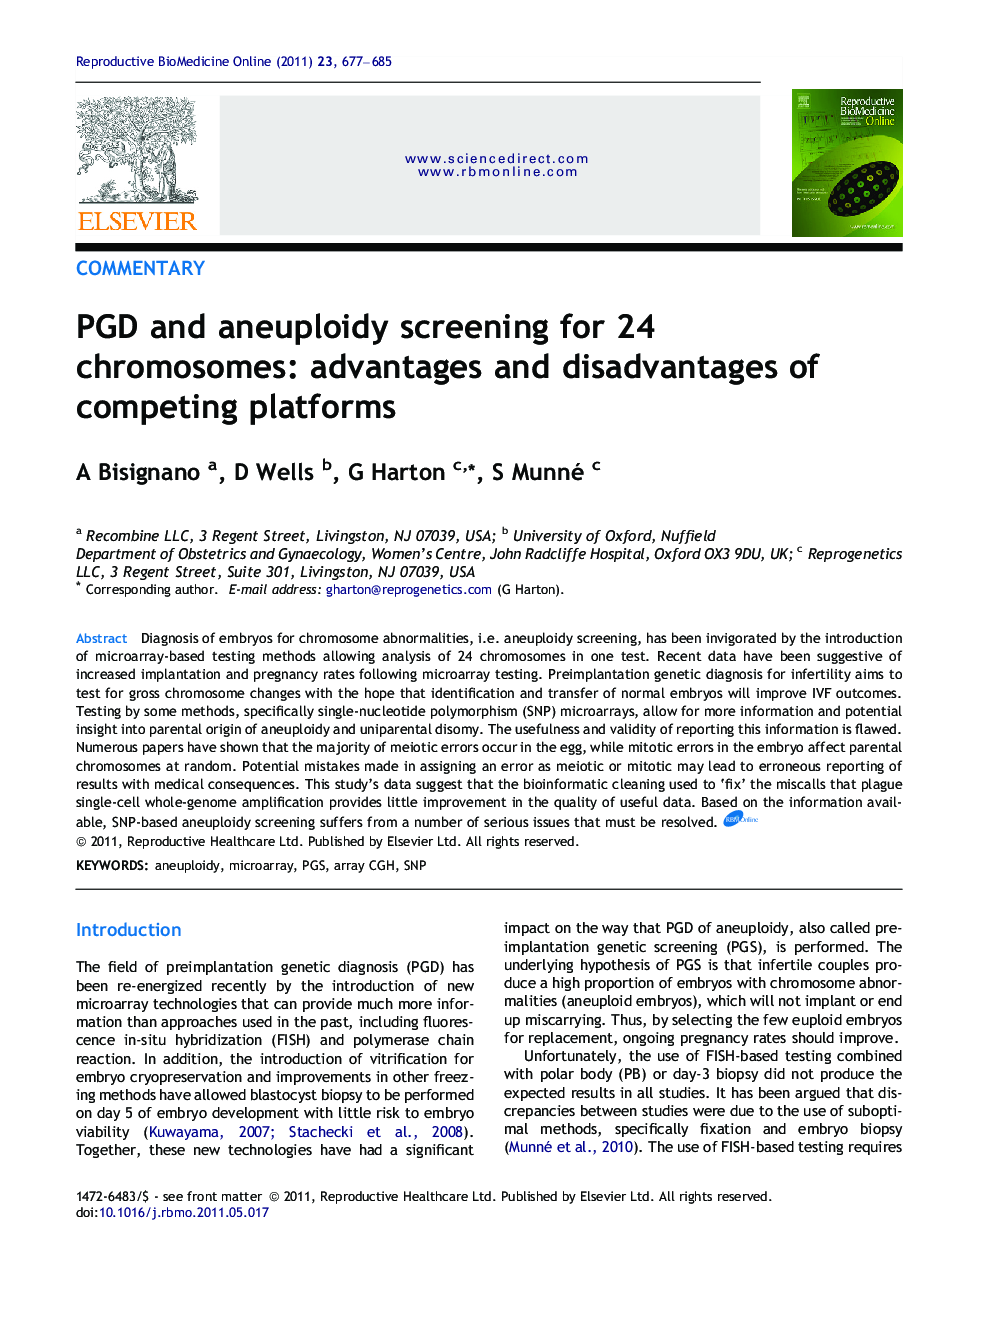 PGD and aneuploidy screening for 24 chromosomes: advantages and disadvantages of competing platforms